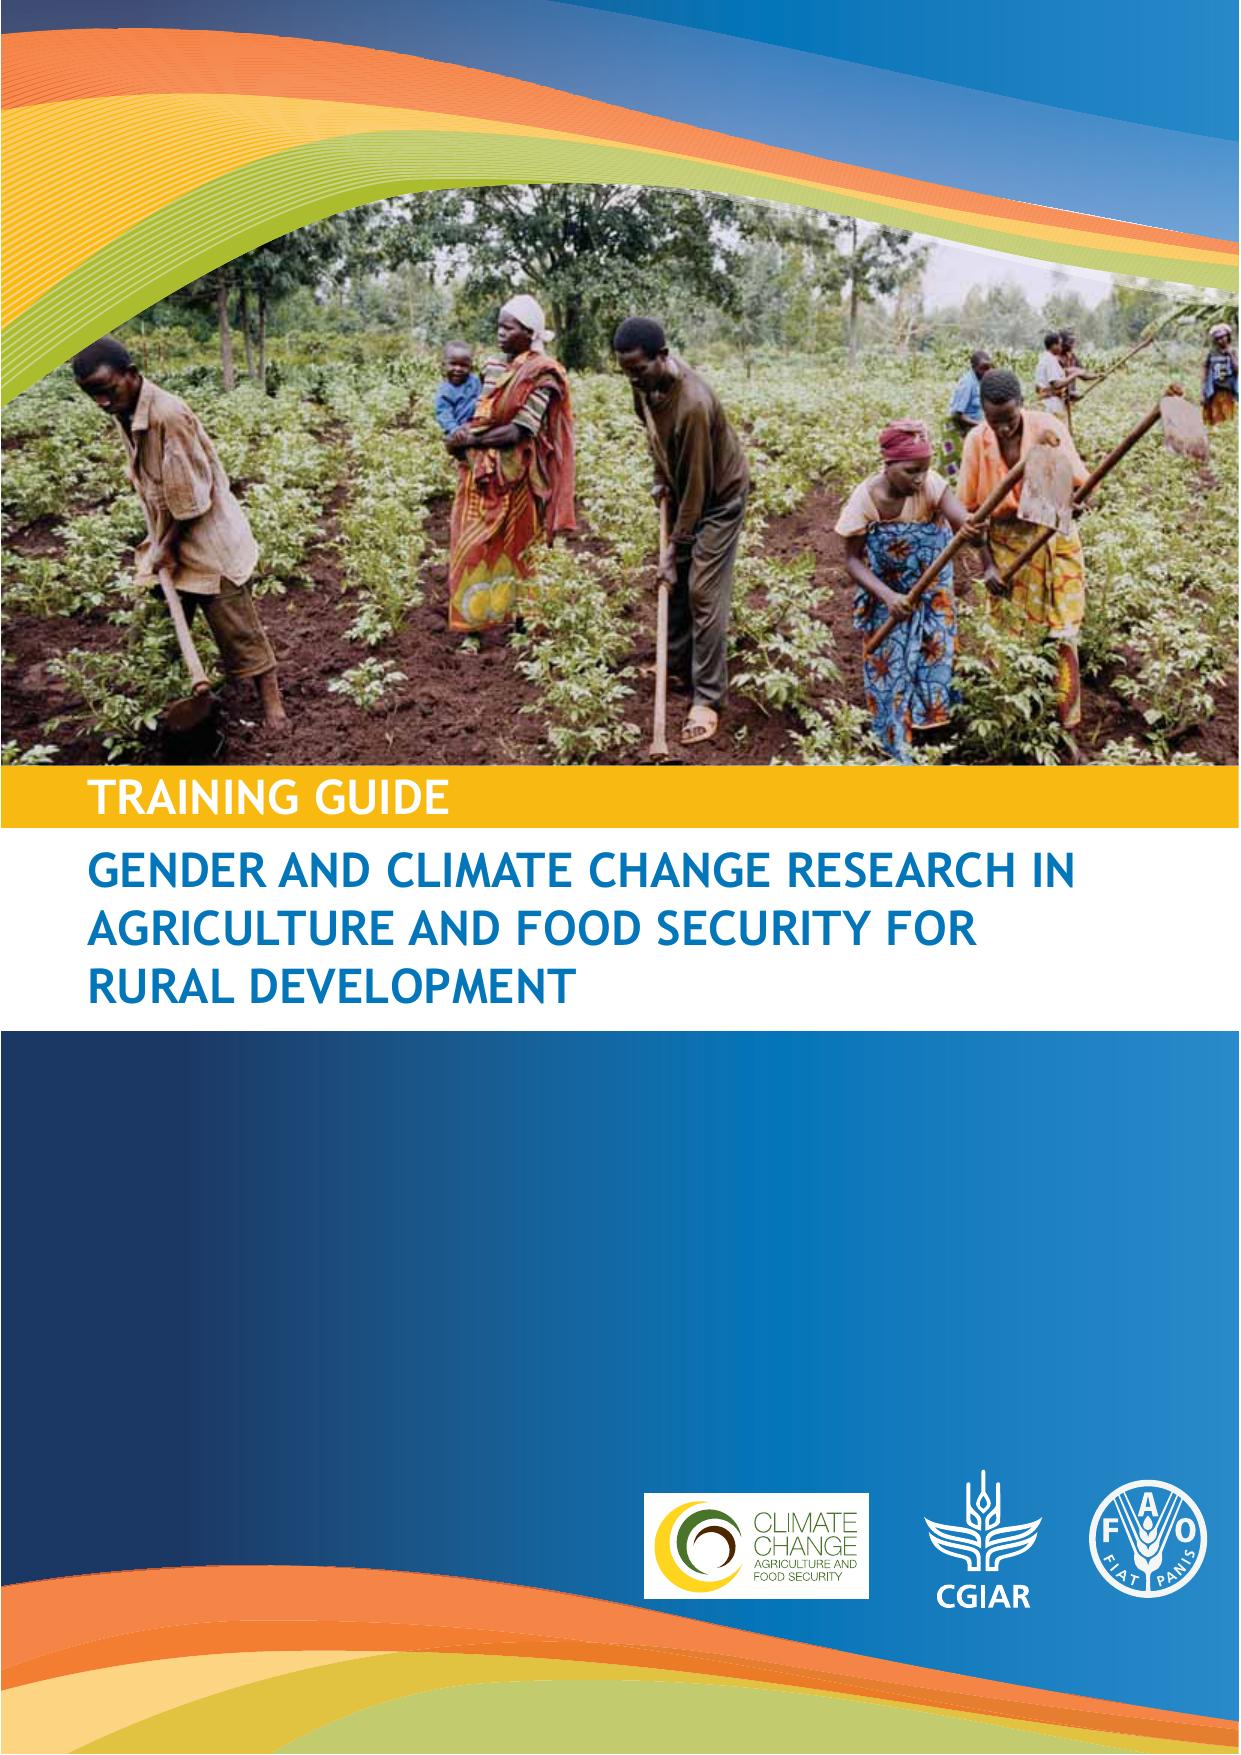 GENDER AND CLIMATE CHANGE ISSUES IN AGRICULTURE AND FOOD SECURITY RESEARCH AND RURAL DEVELOPMENT